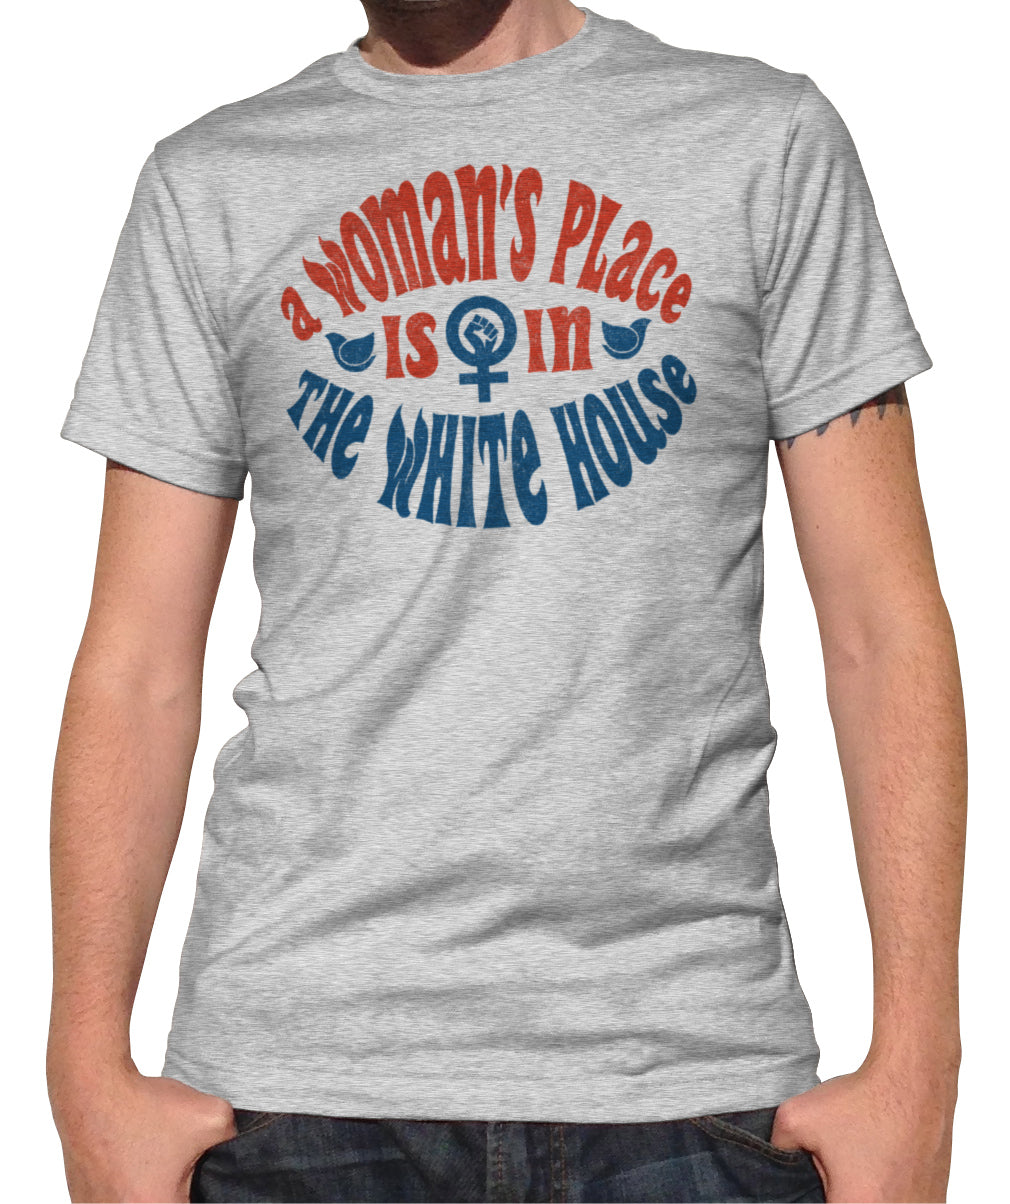 Men's A Woman's Place is in The White House T-Shirt